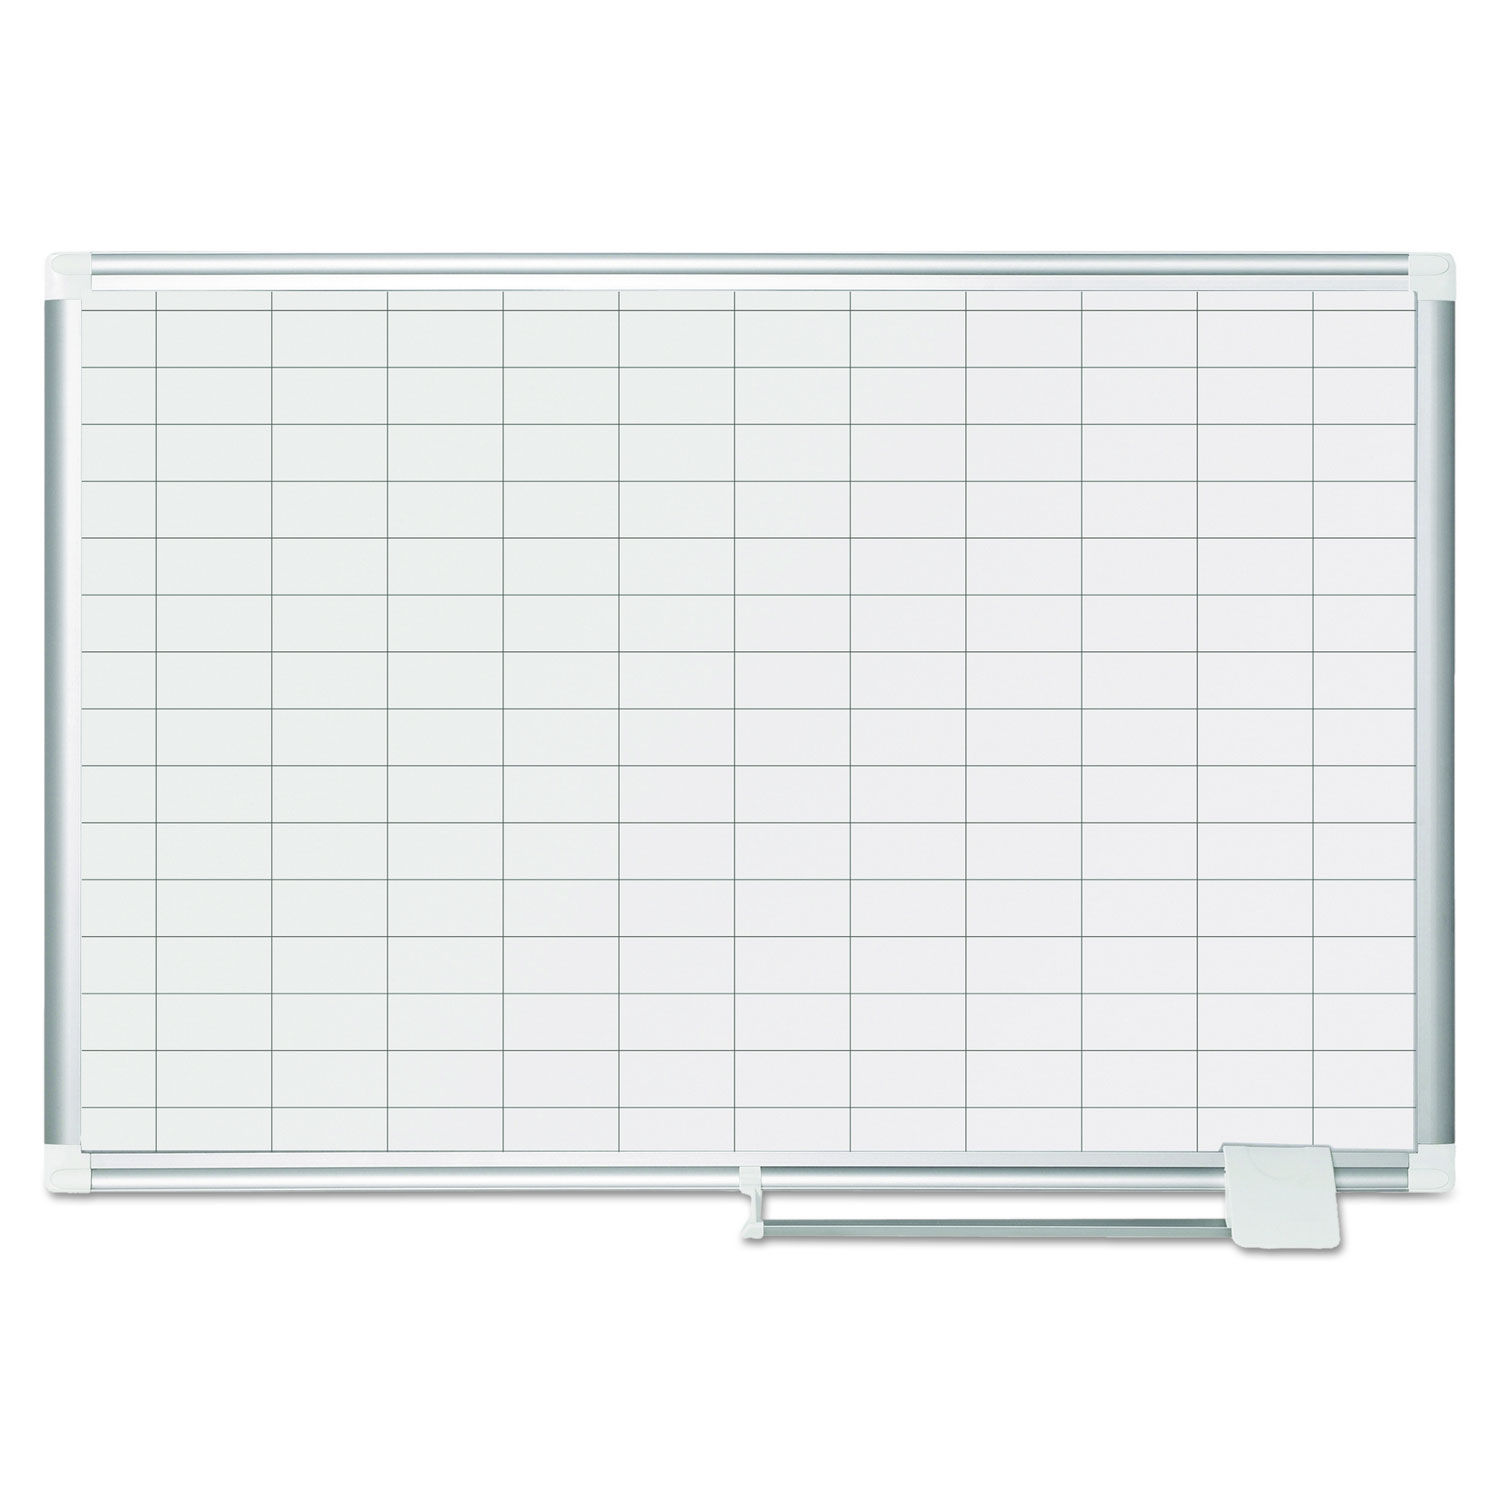 Gridded Magnetic Steel Dry Erase Planning Board 1 x 2 Grid, 36 x 24, White Surface, Silver Aluminum Frame